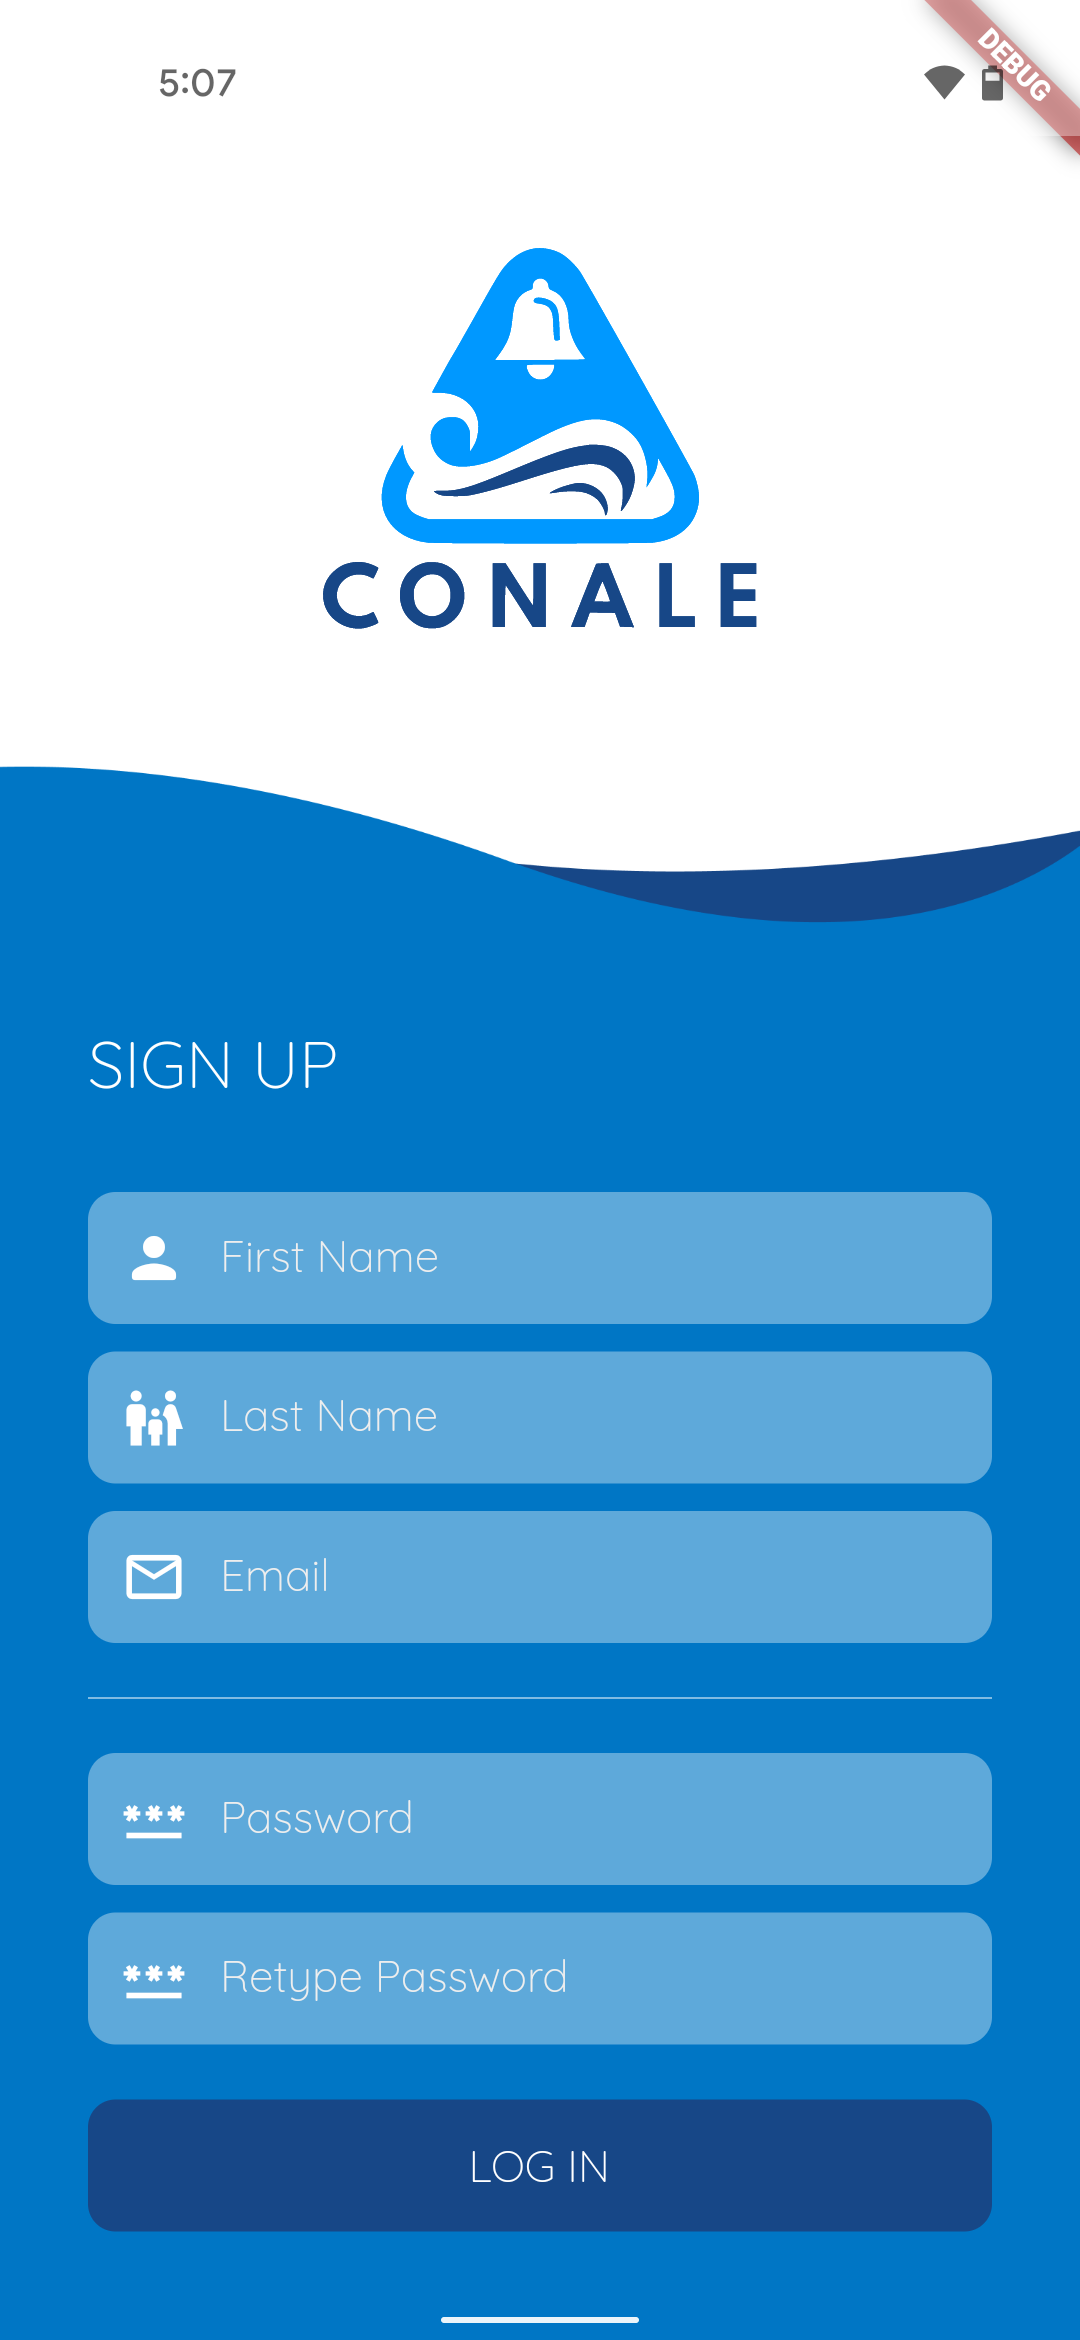 Conale app sign-up screen.